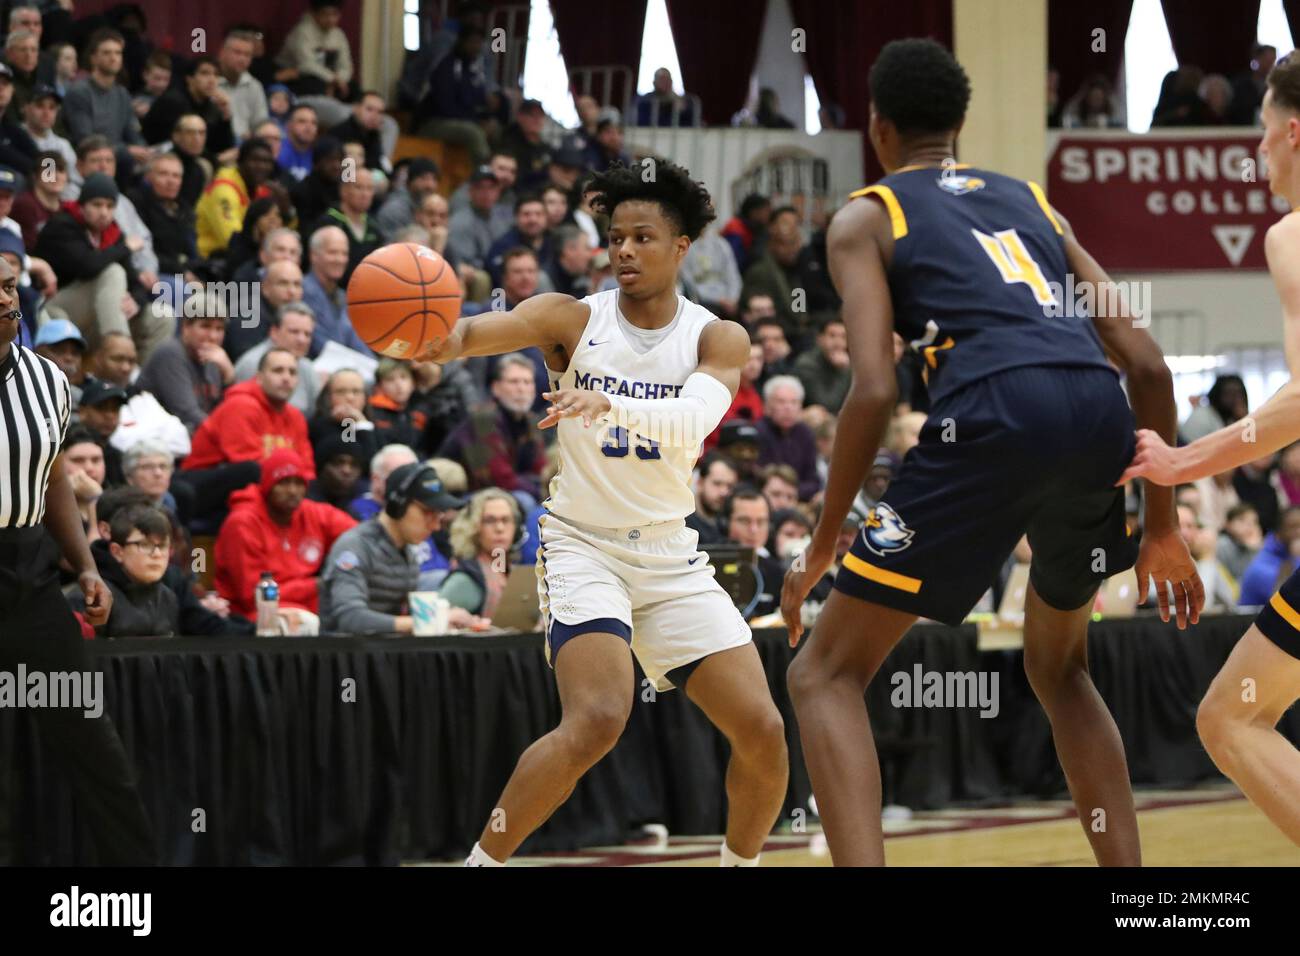 McEachern's Isaac Okoro #35 in action against Rancho Christian during a  high school basketball game at the Hoophall Classic, Monday, January 21,  2019, in Springfield, MA. (AP Photo/Gregory Payan Stock Photo - Alamy